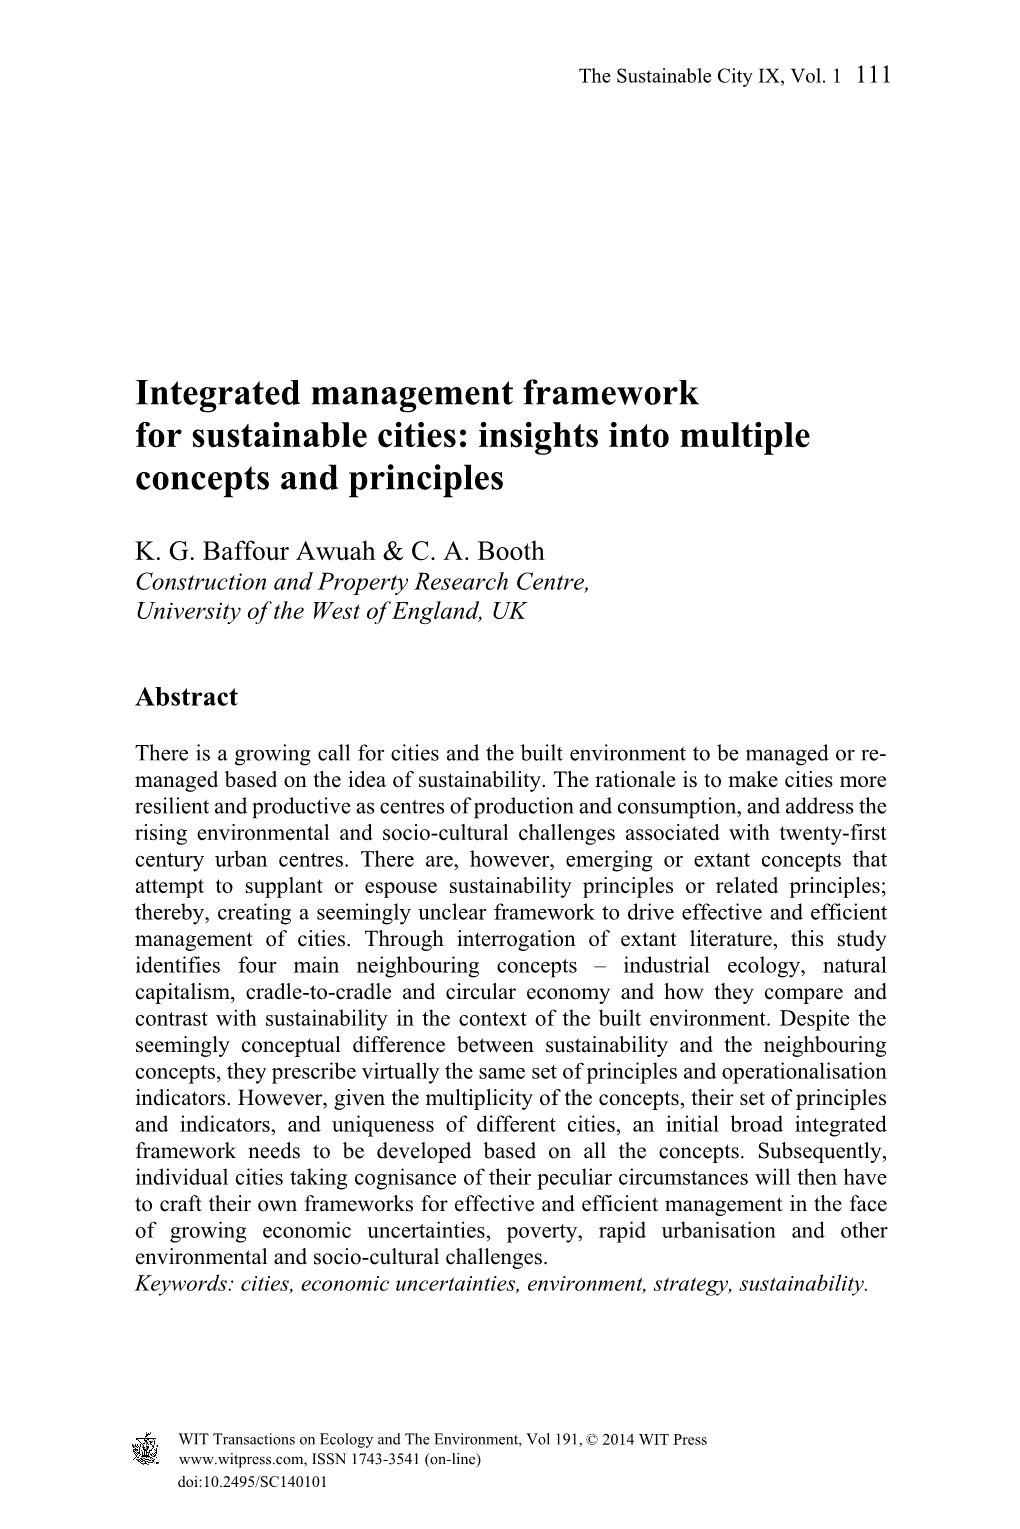 Integrated Management Framework for Sustainable Cities: Insights Into Multiple Concepts and Principles